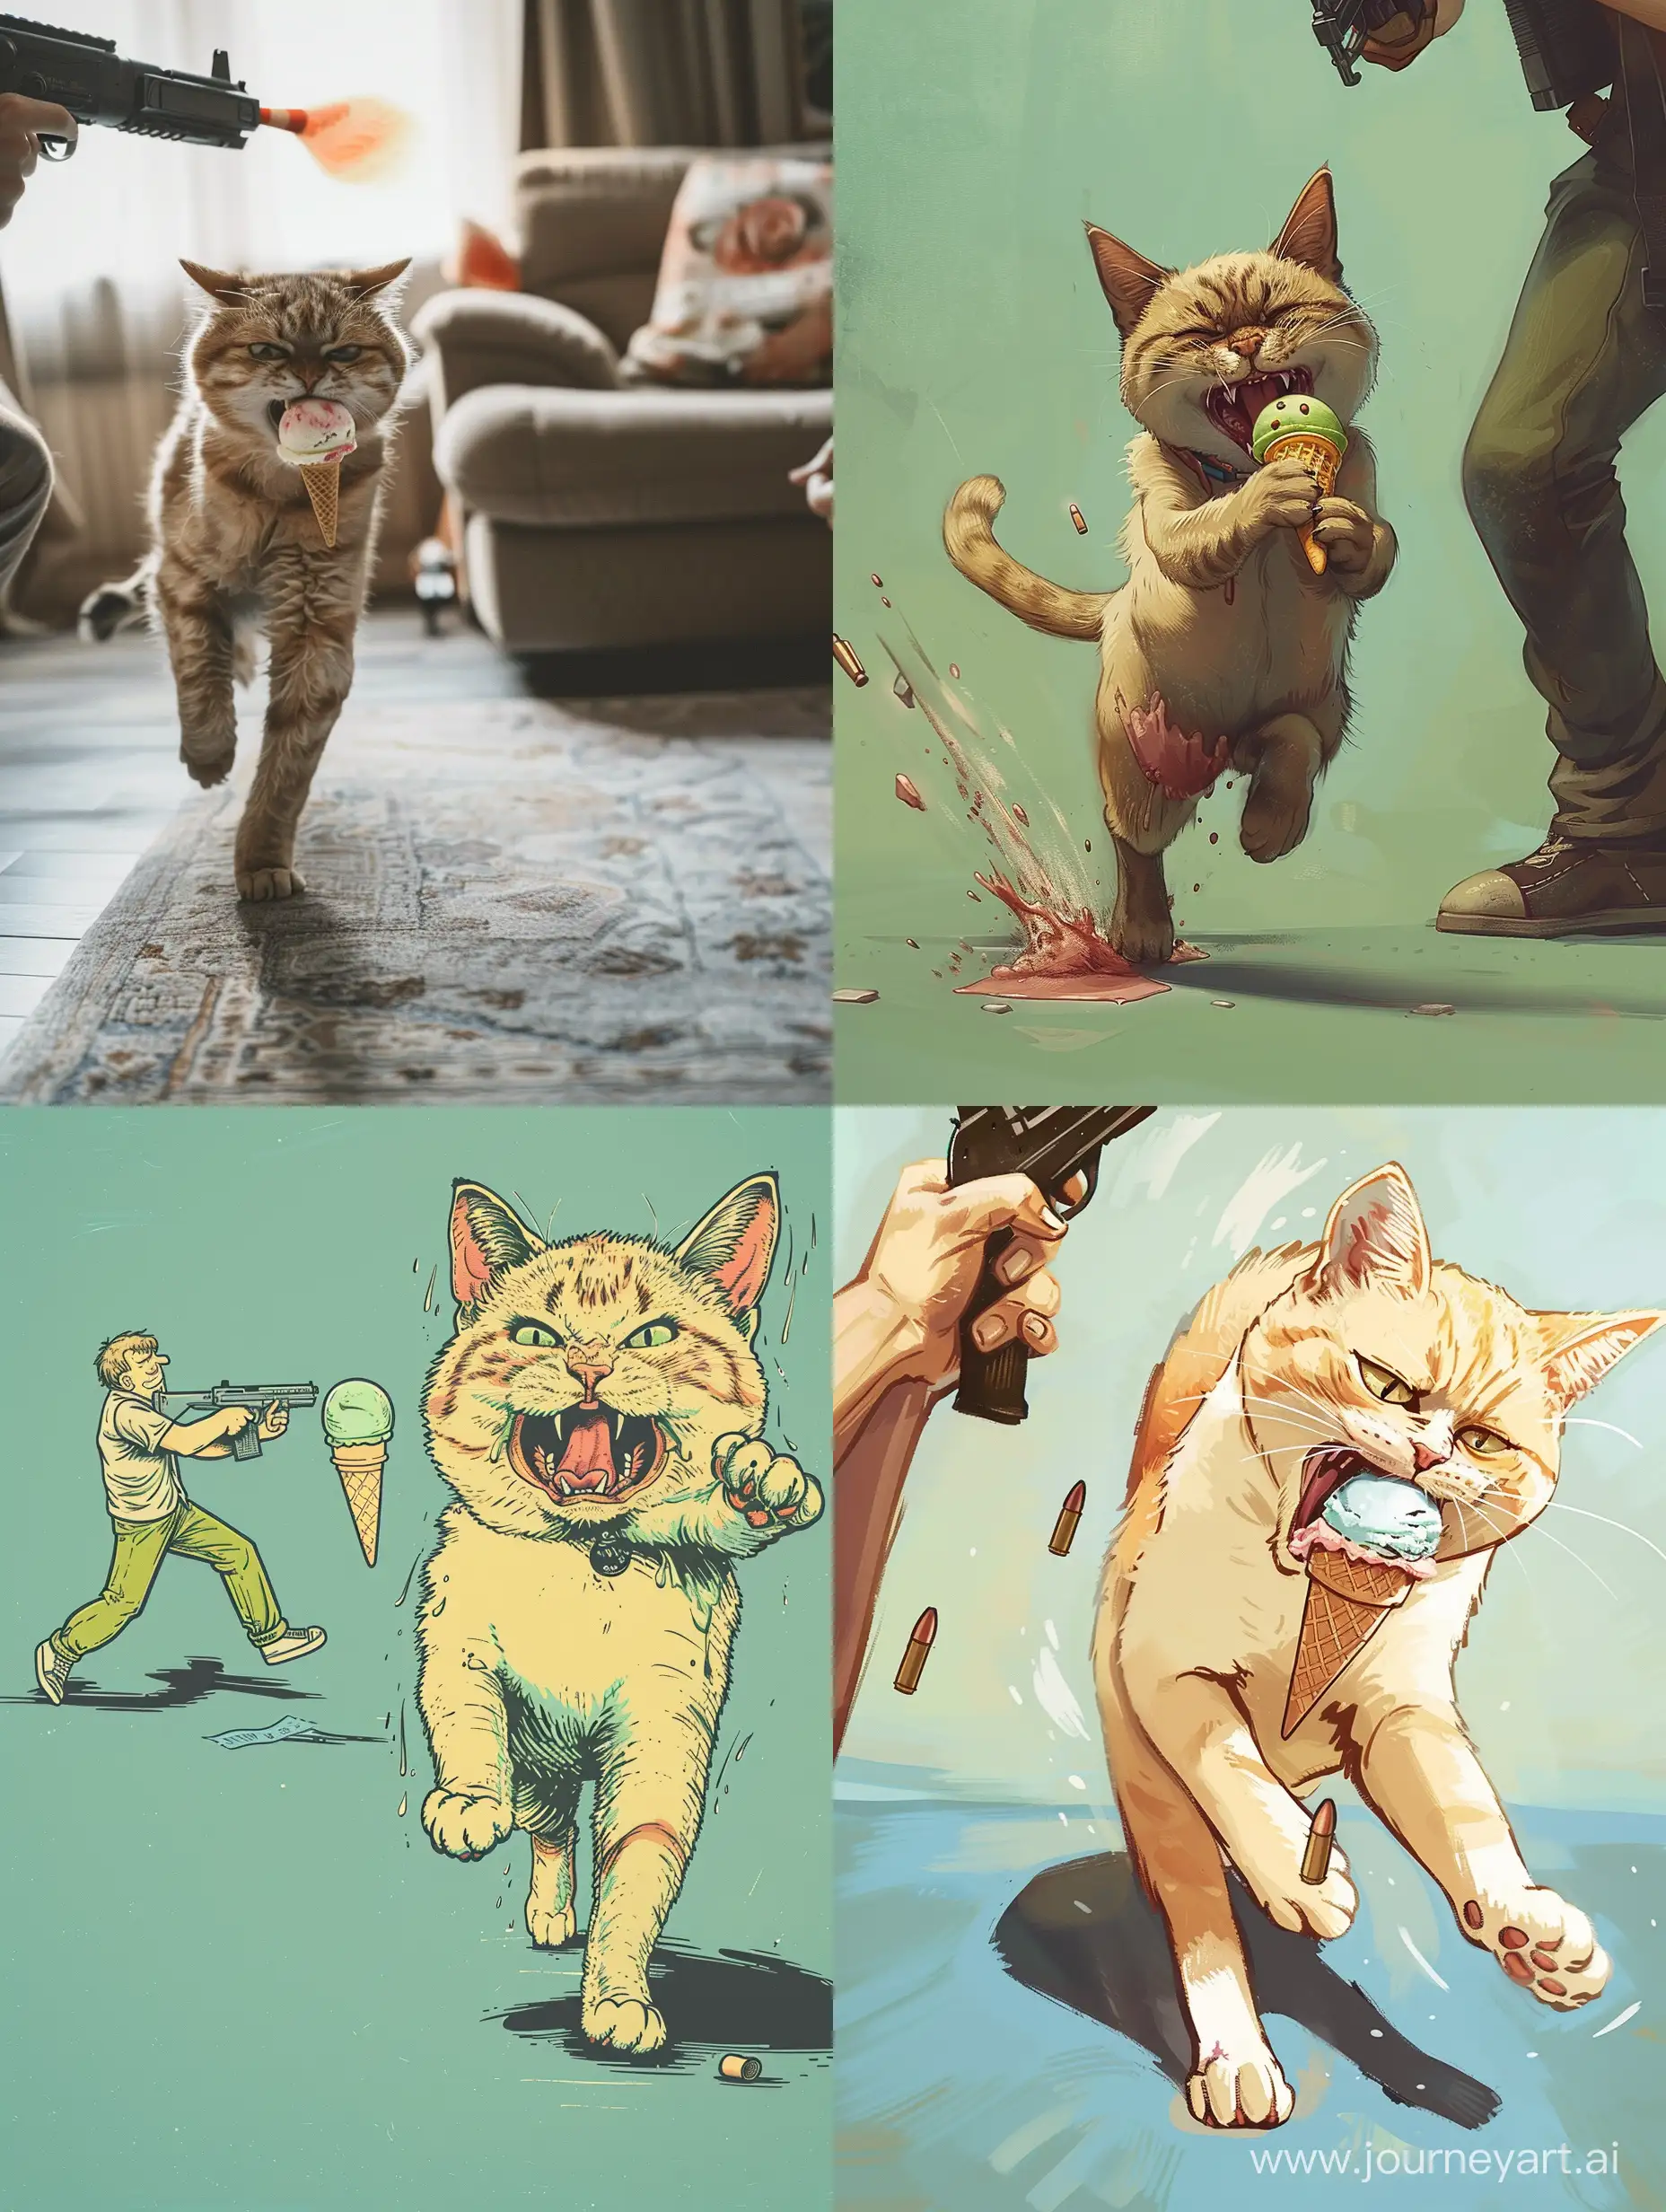 a cat sprinting away with a stolen ice cream cone in its mouth, while crying and looking guilty, and a person chasing her with a machine gun. It seems like you are trying to create a humorous or absurd scenario